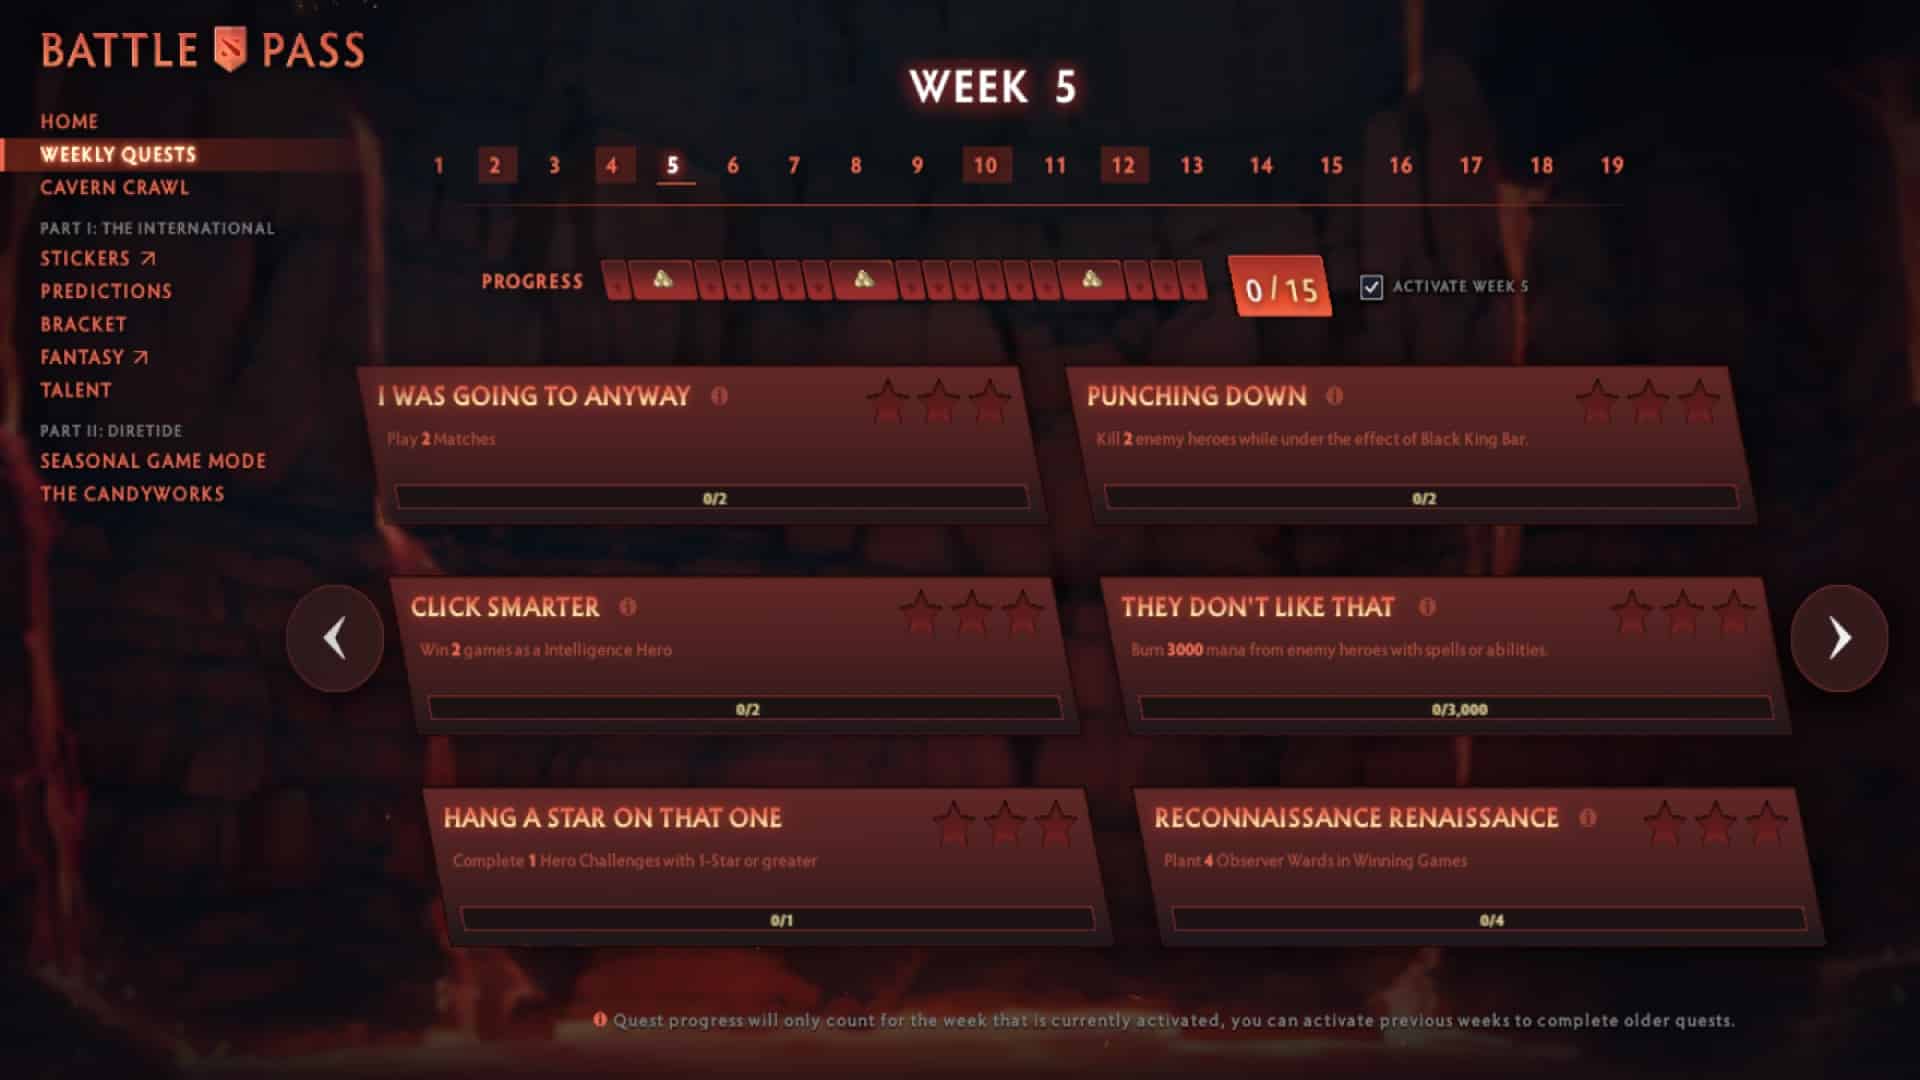 Battle Pass 2022 - Guide to Completing Weekly Quests for Week 5 - ft